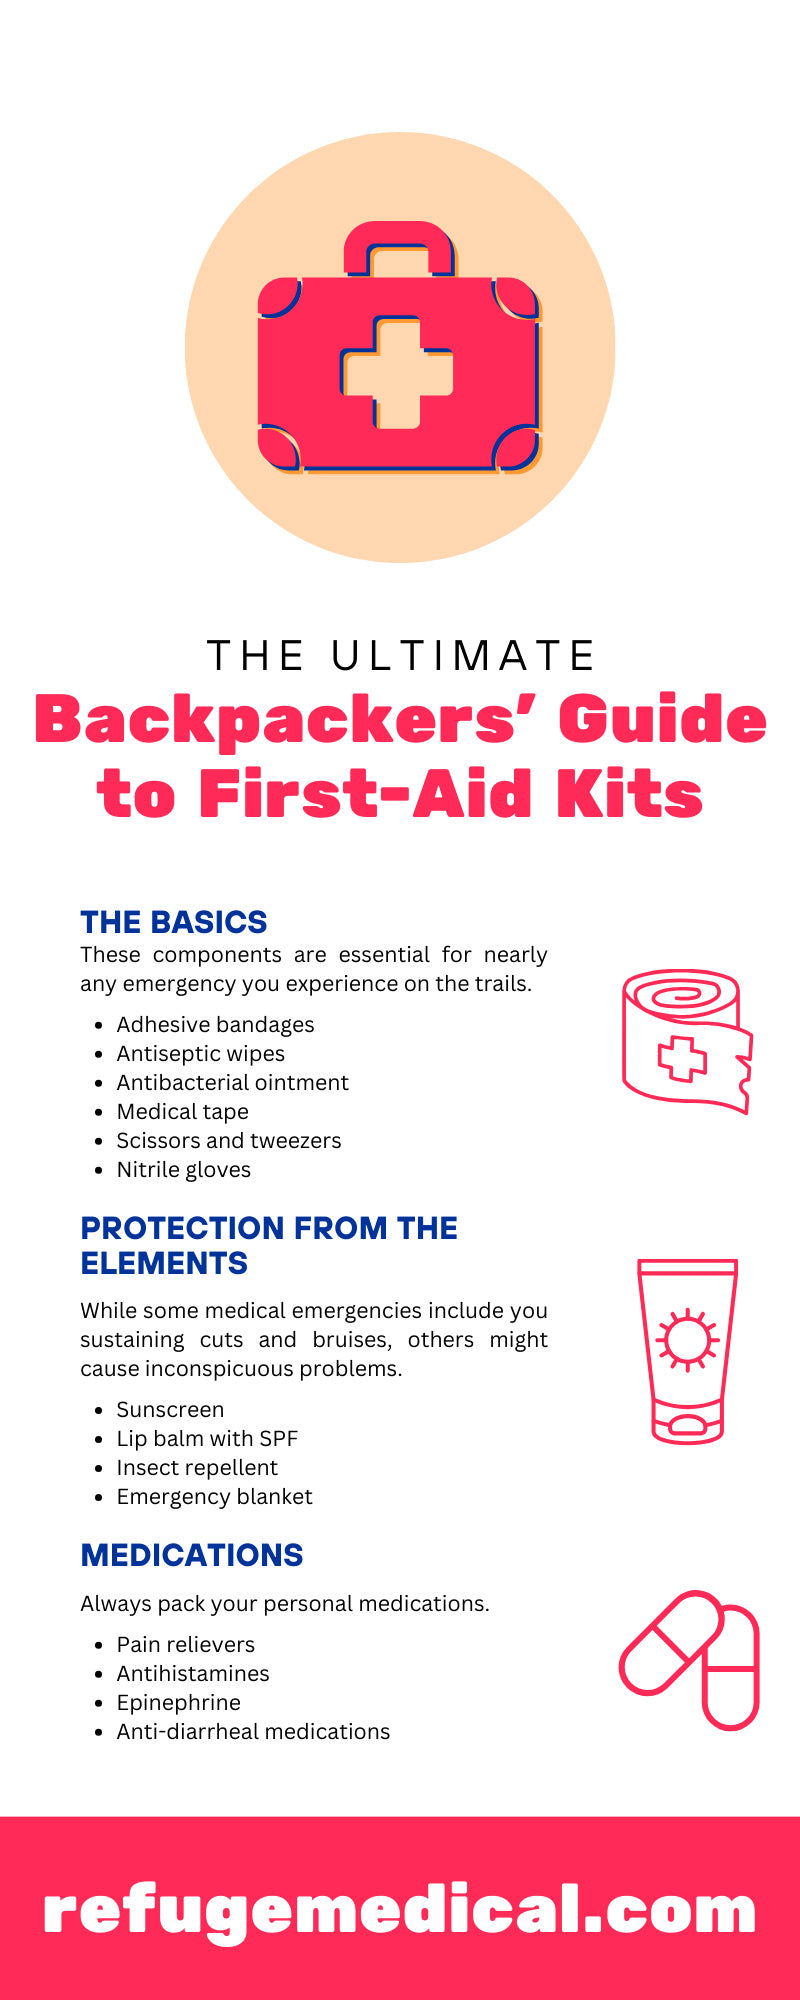 The Ultimate Backpackers’ Guide to First-Aid Kits